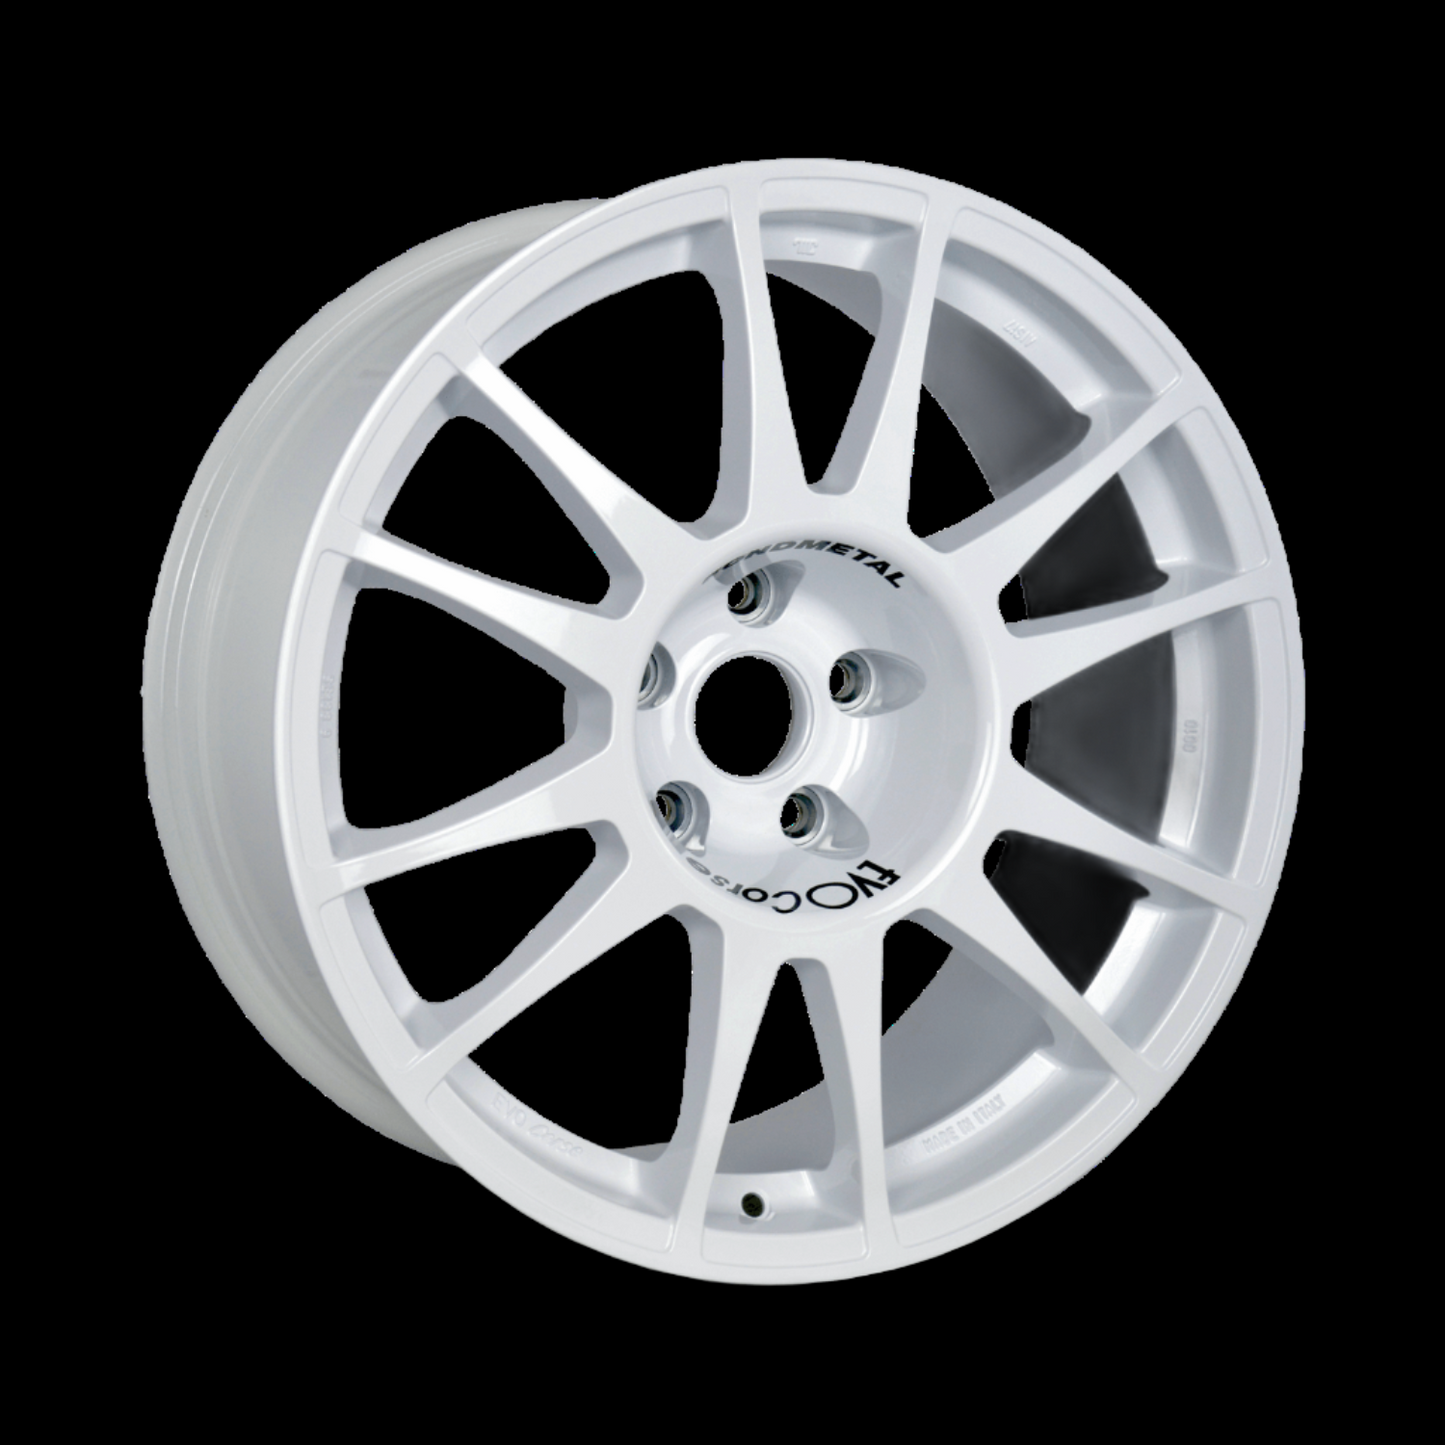 Front view of a Sanremo Corse 18-inch white wheel with a 12-spoke design against a black background 